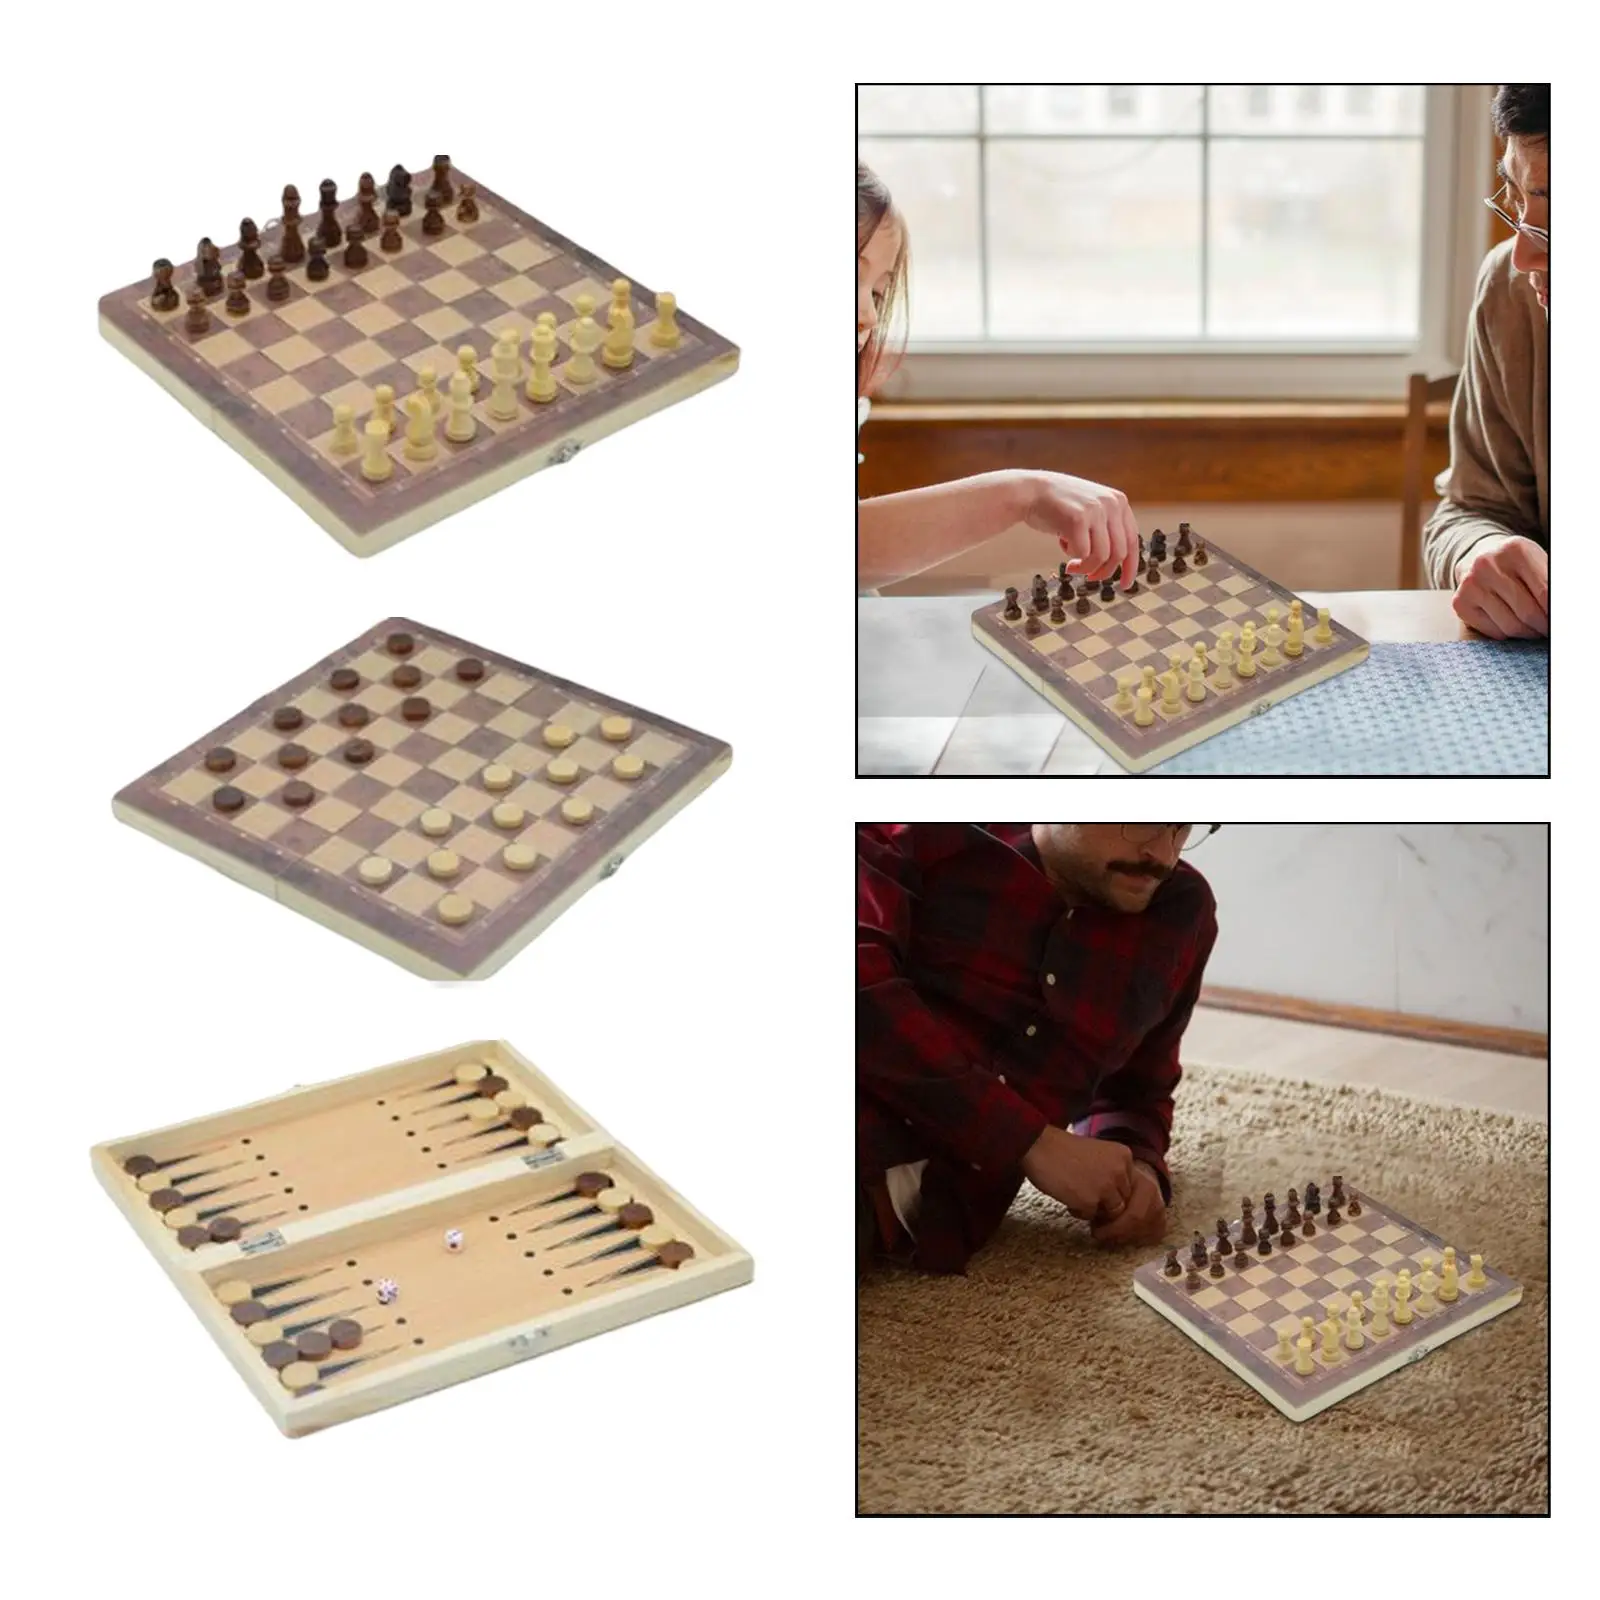 3 in 1 Chess Checkers Backgammon Sets Folding Board Educational Toys Lightweight Wooden Chess Set Board Games for Indoor Home